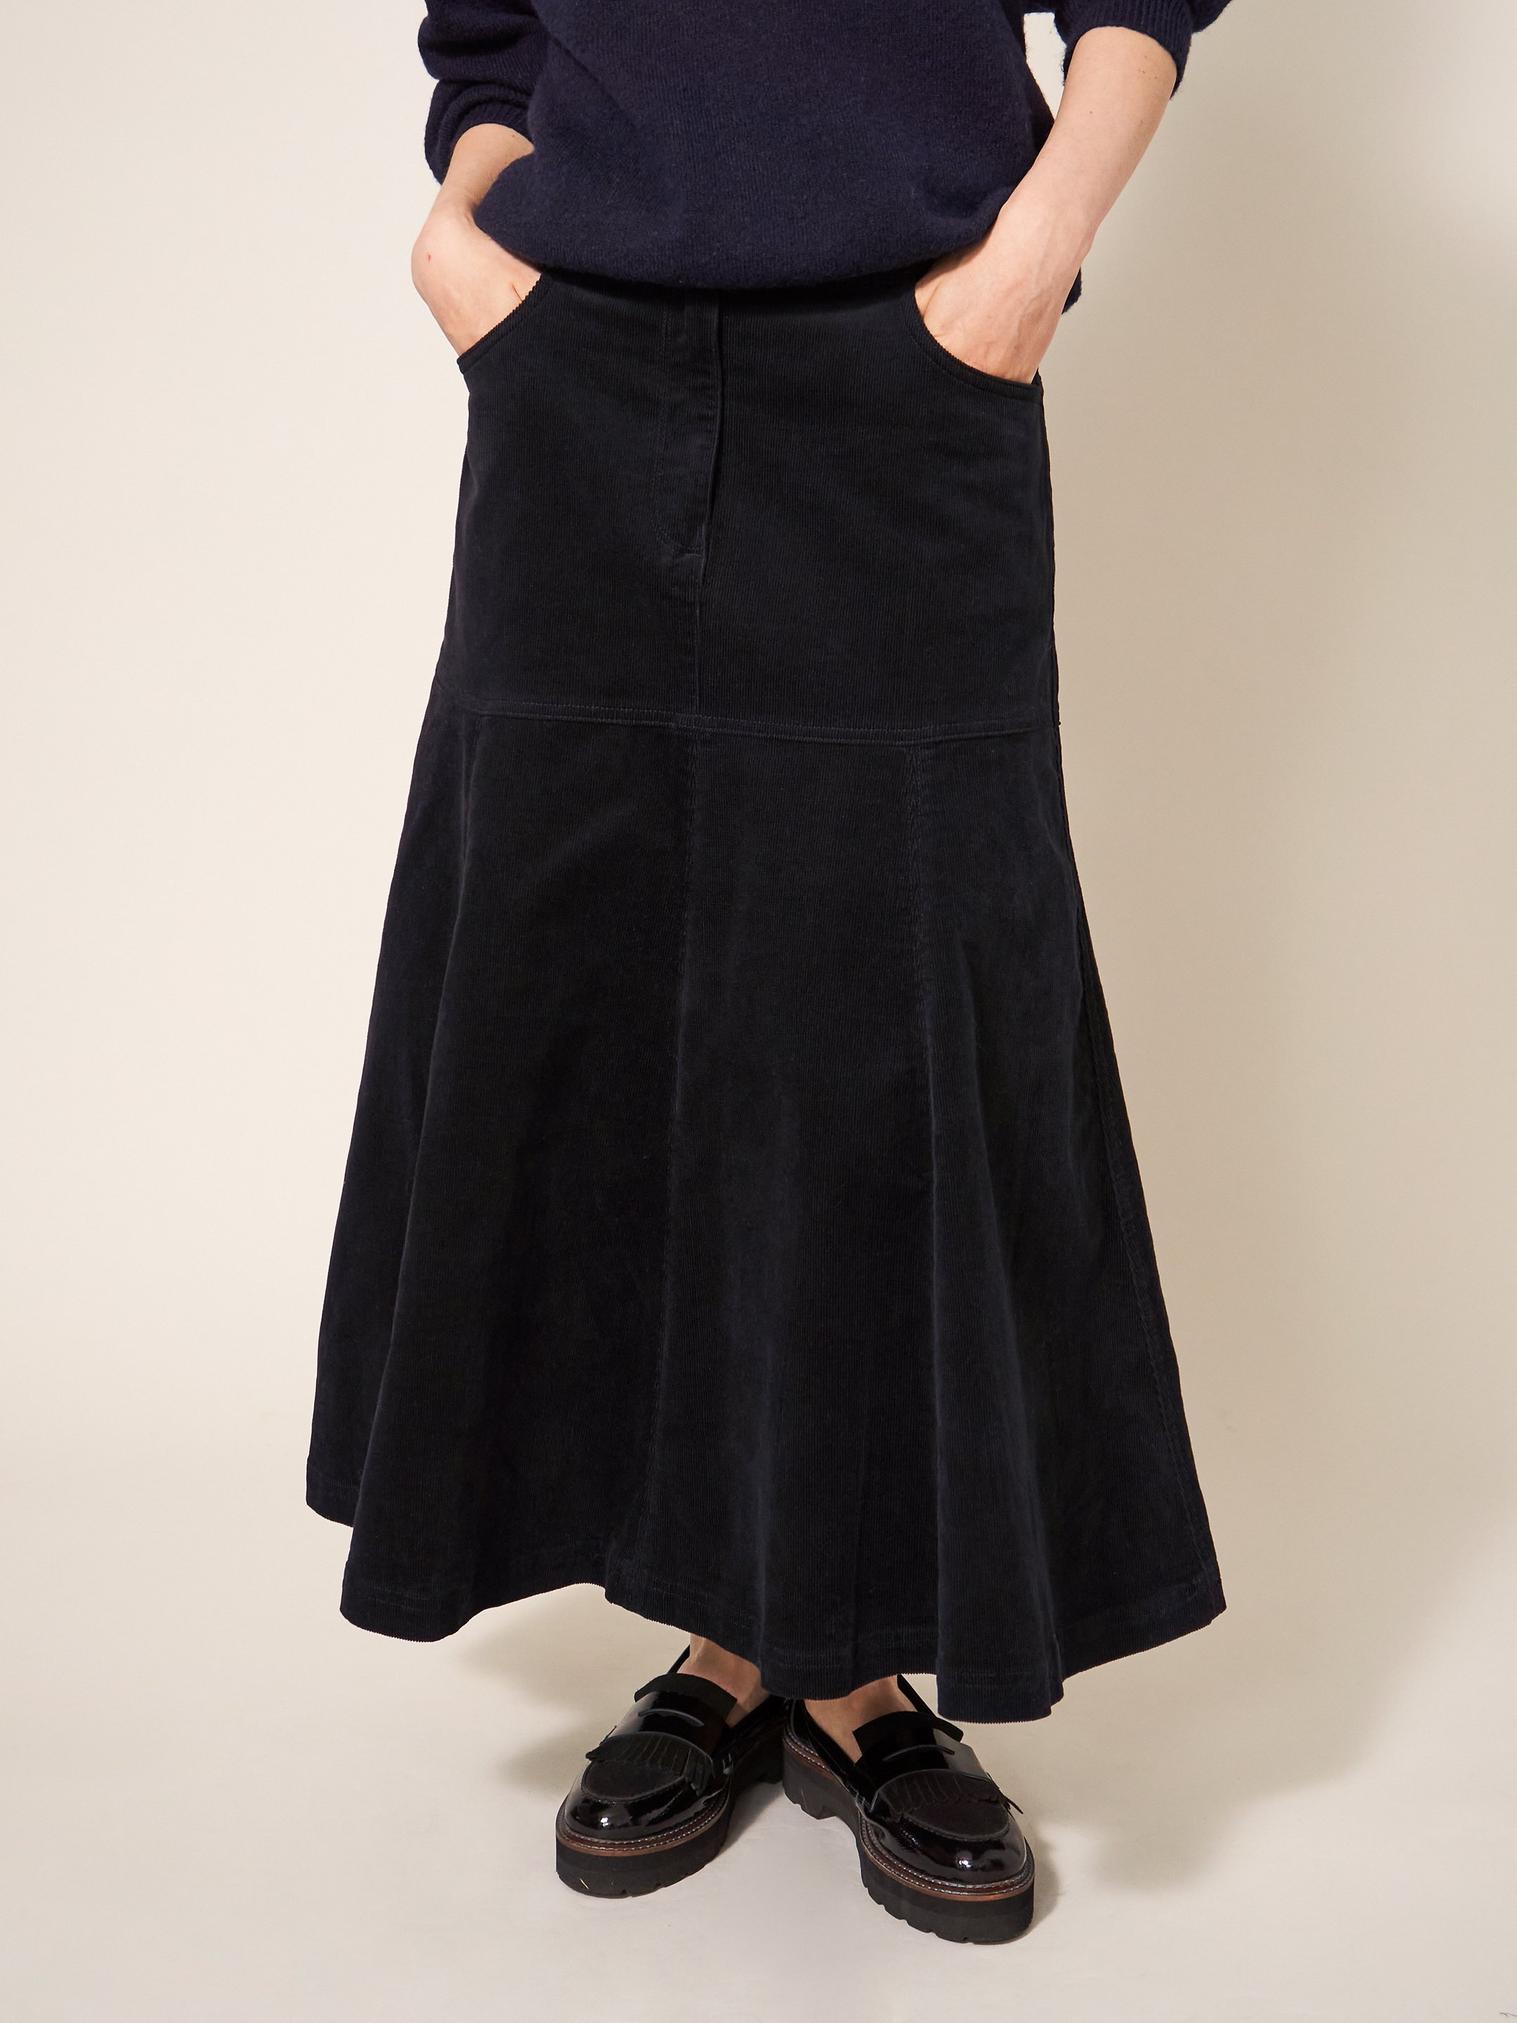 Quinn Organic Cord Skirt in PURE BLK - LIFESTYLE